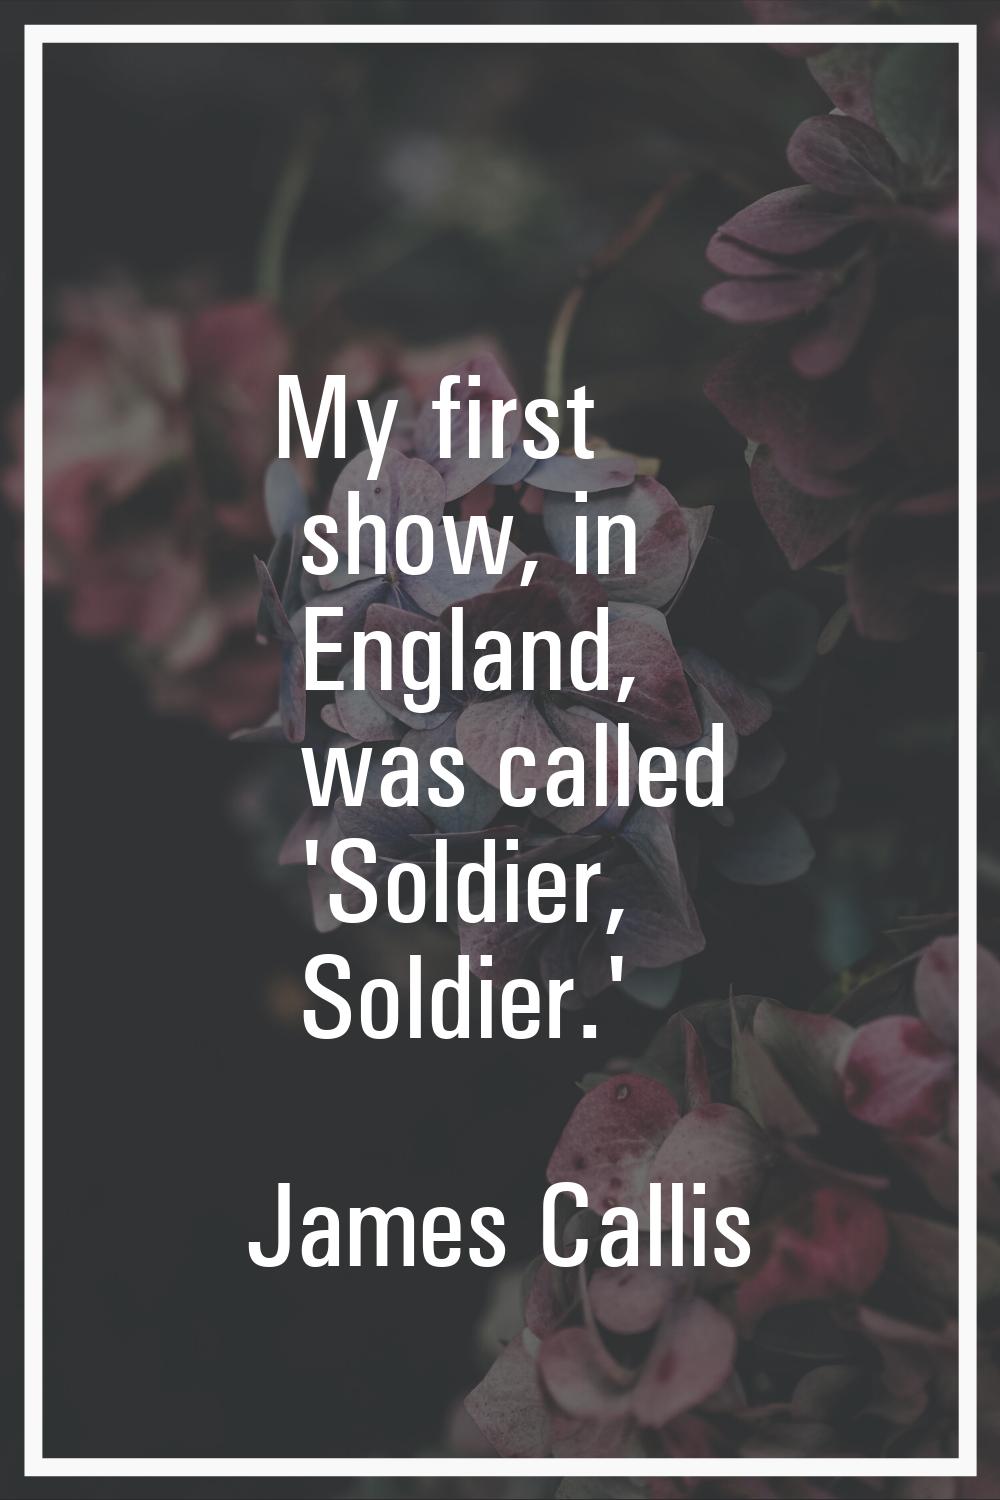 My first show, in England, was called 'Soldier, Soldier.'